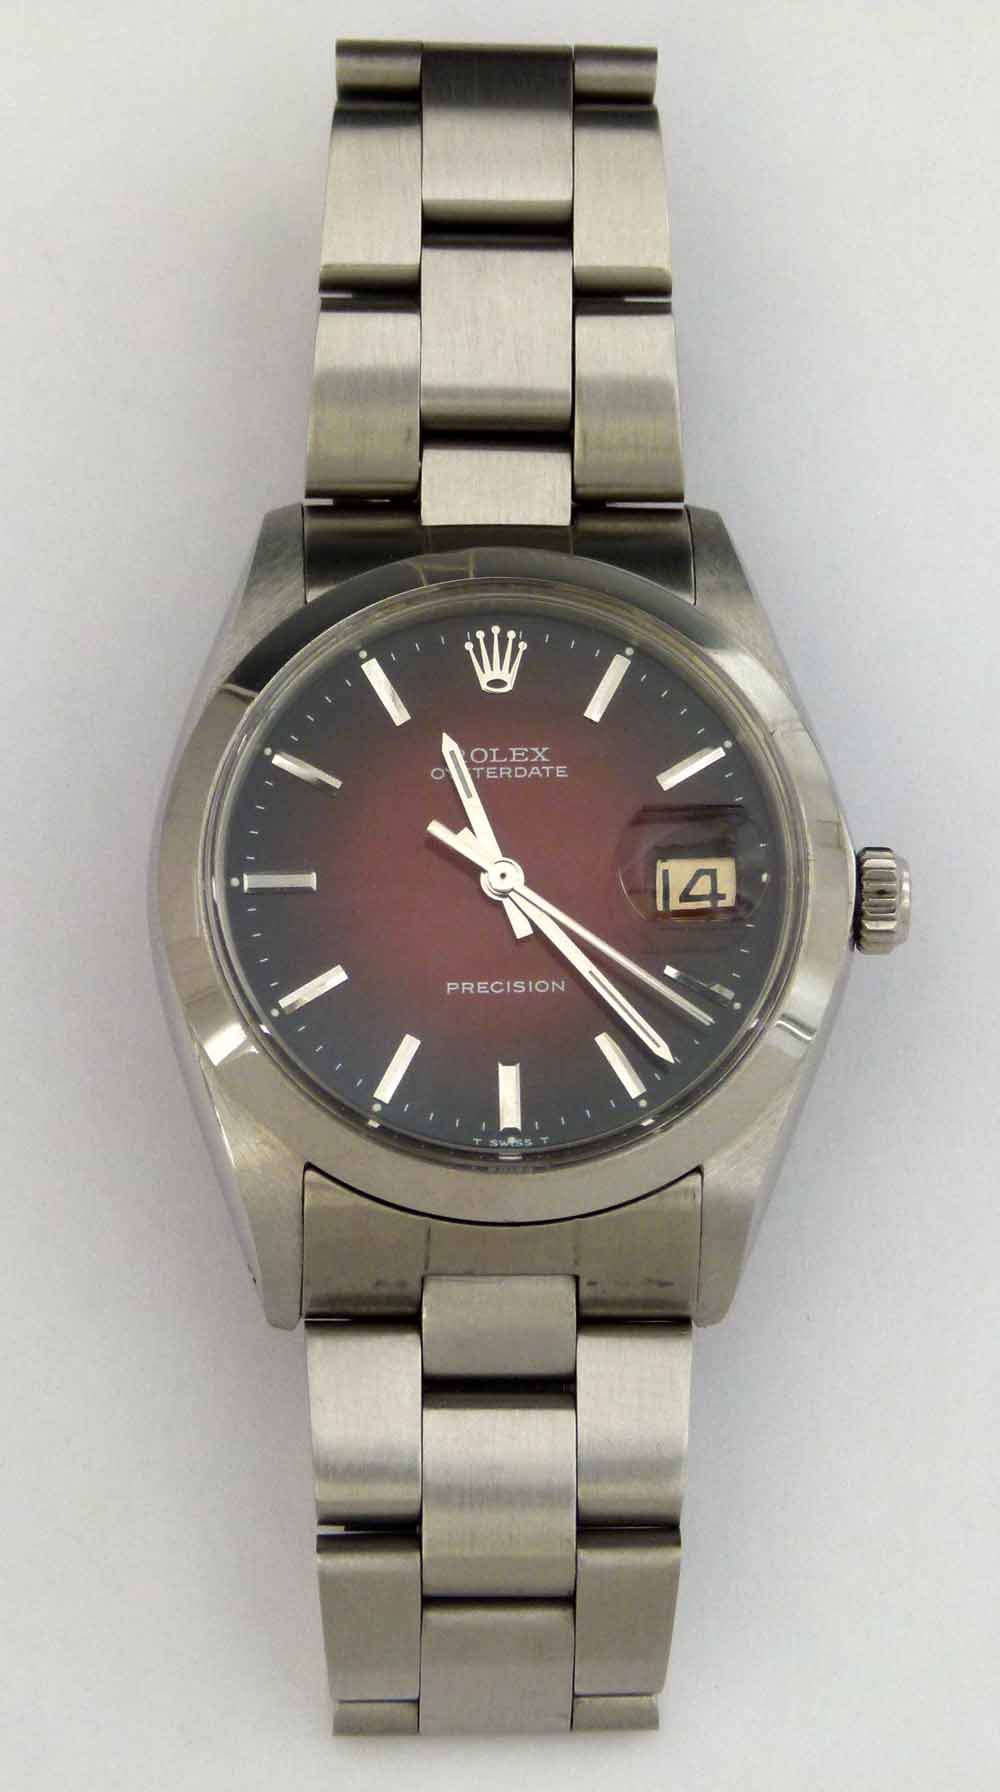 Rolex Oysterdate Precision stainless man's wristwatch, 1970's, red vignette dial, date at 3:00,